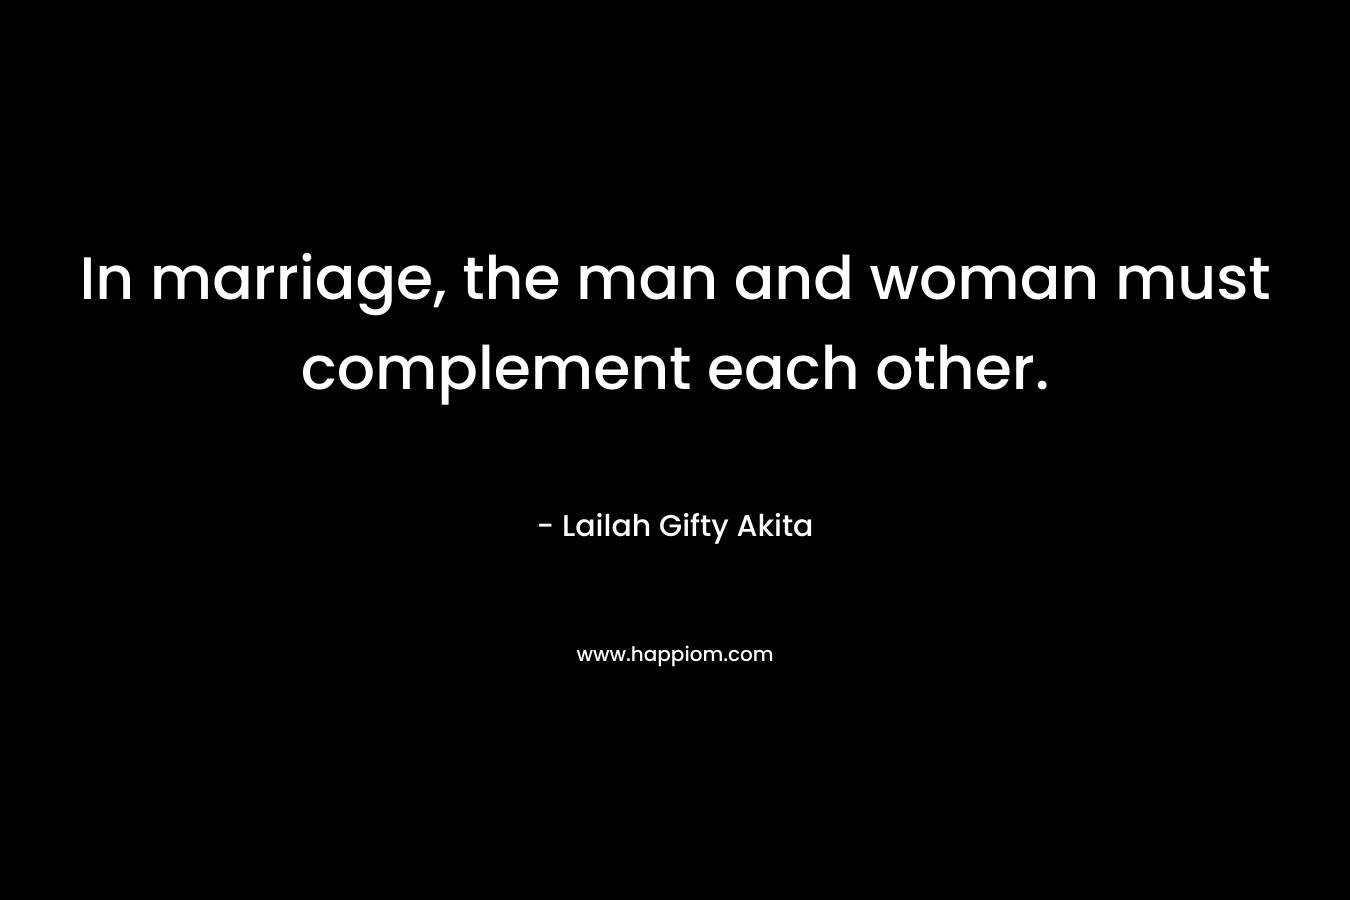 In marriage, the man and woman must complement each other. – Lailah Gifty Akita